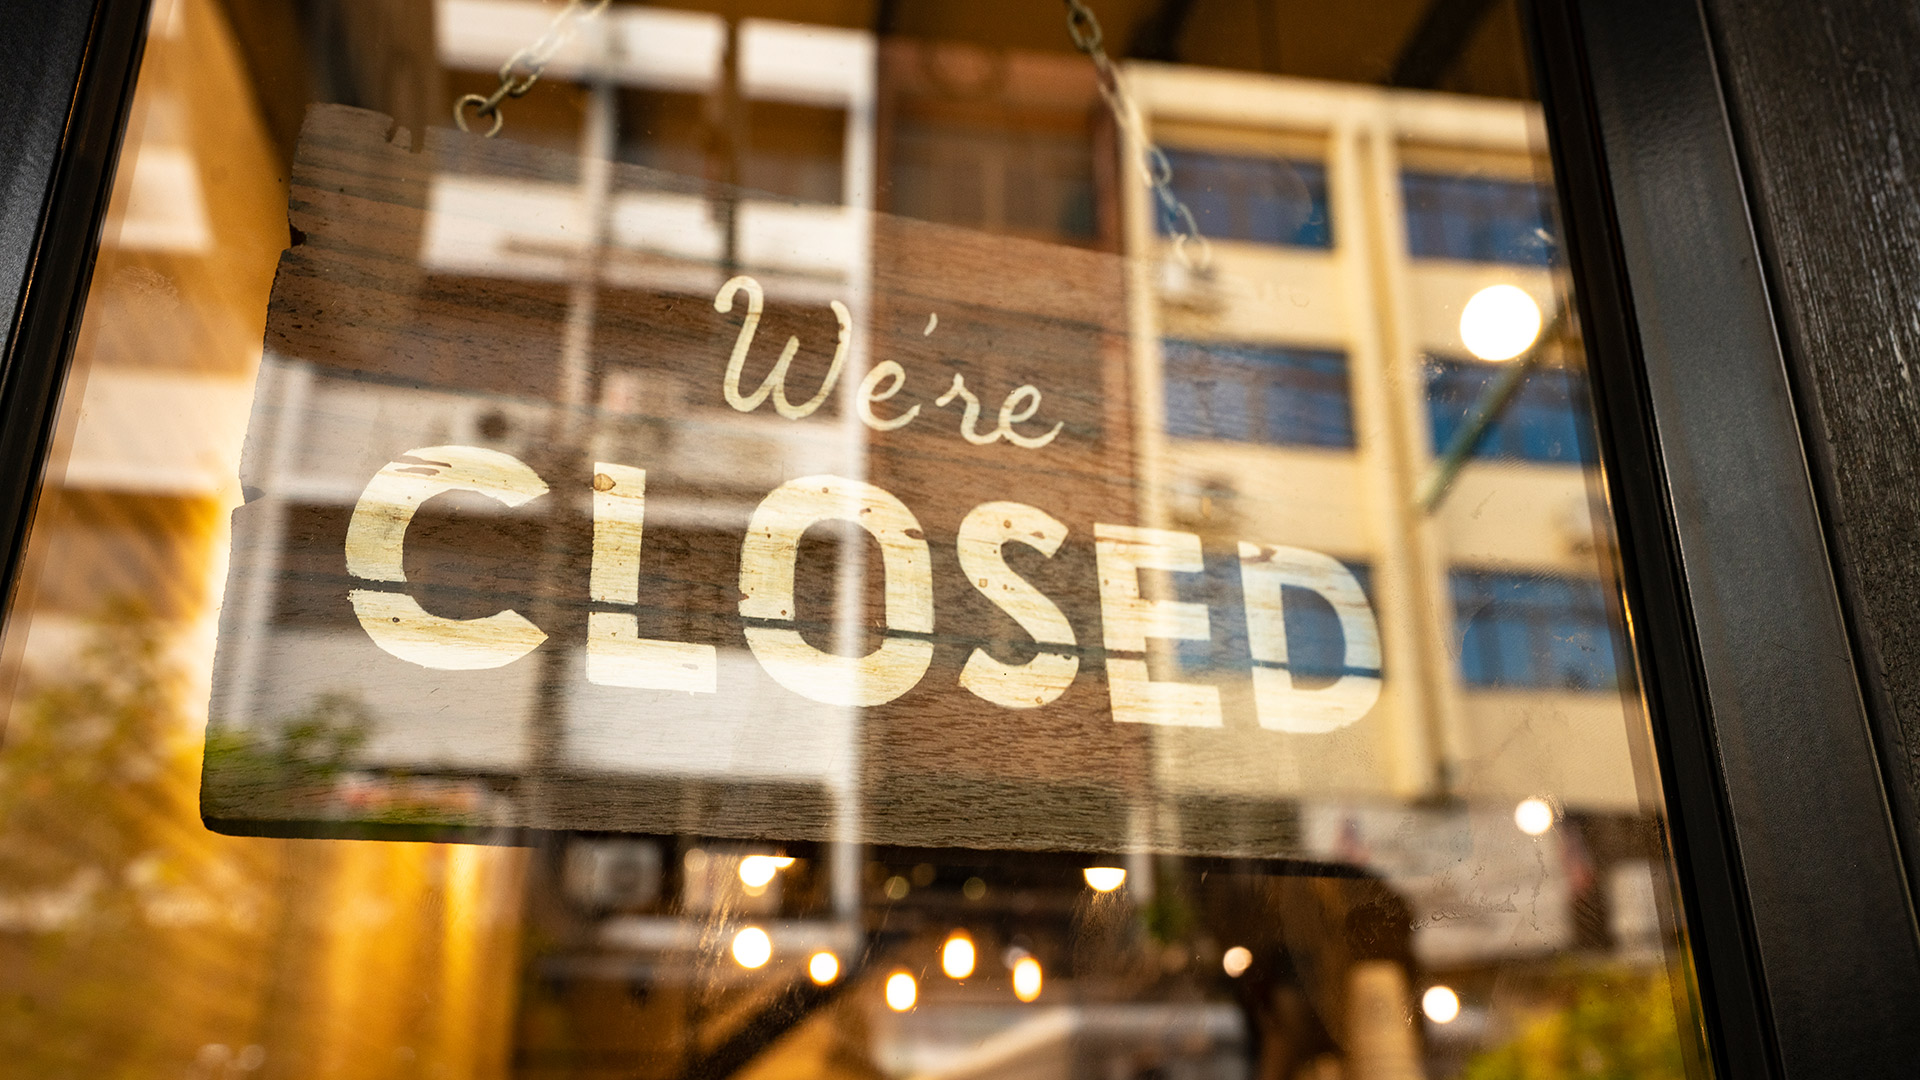 Closed sign hanging in business window